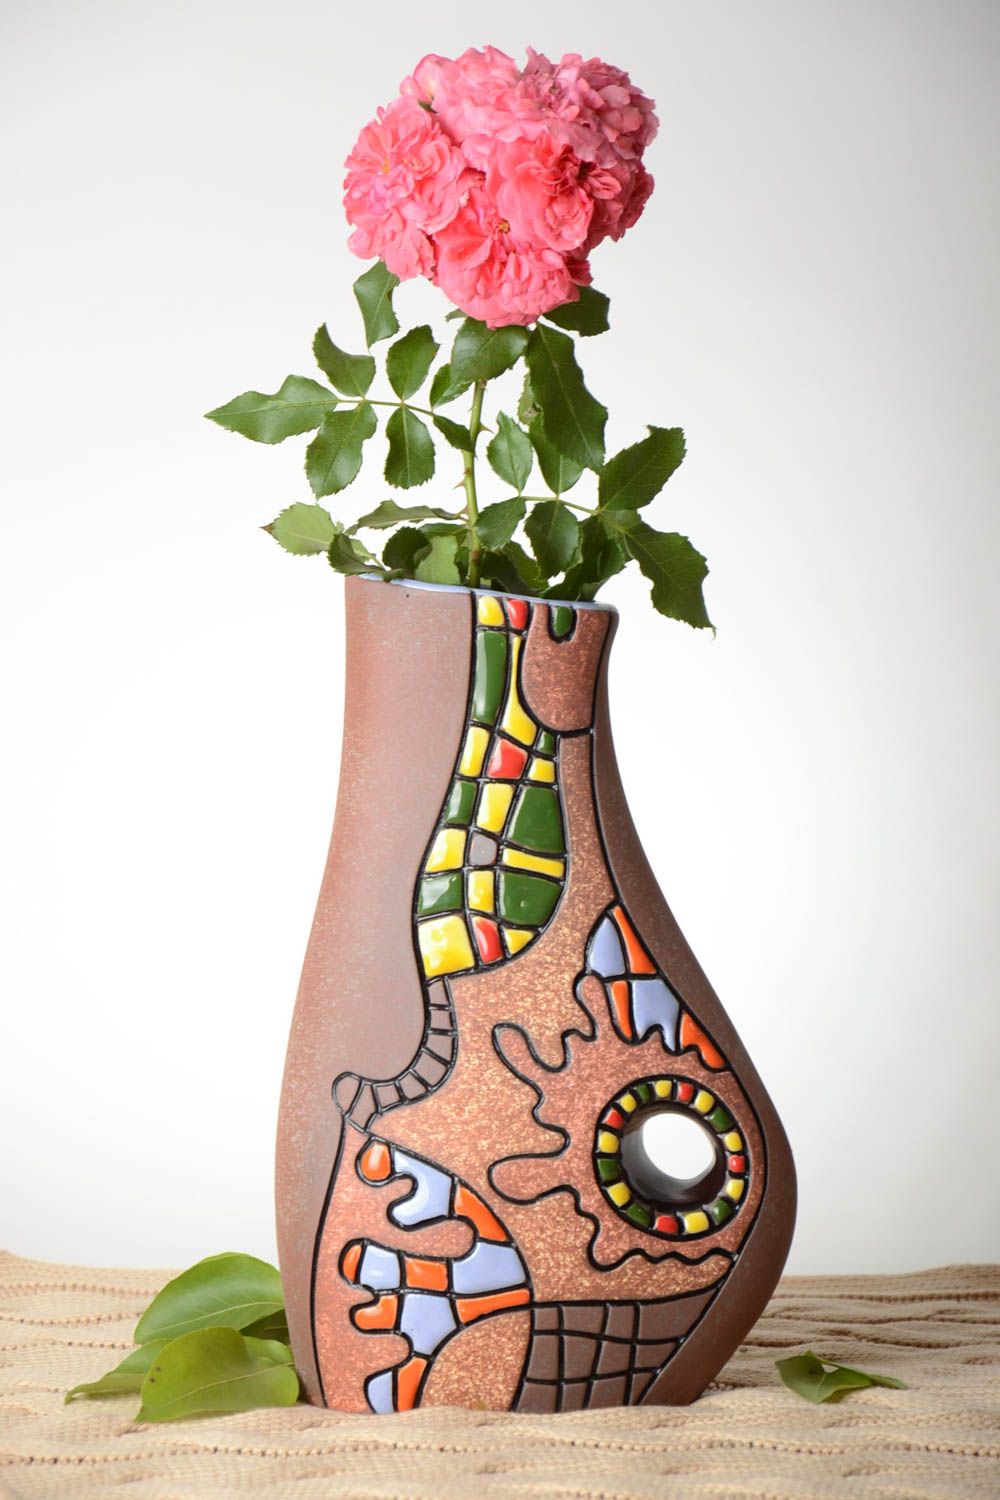 11 inches flower vase décor in art style 3 lb photo 1